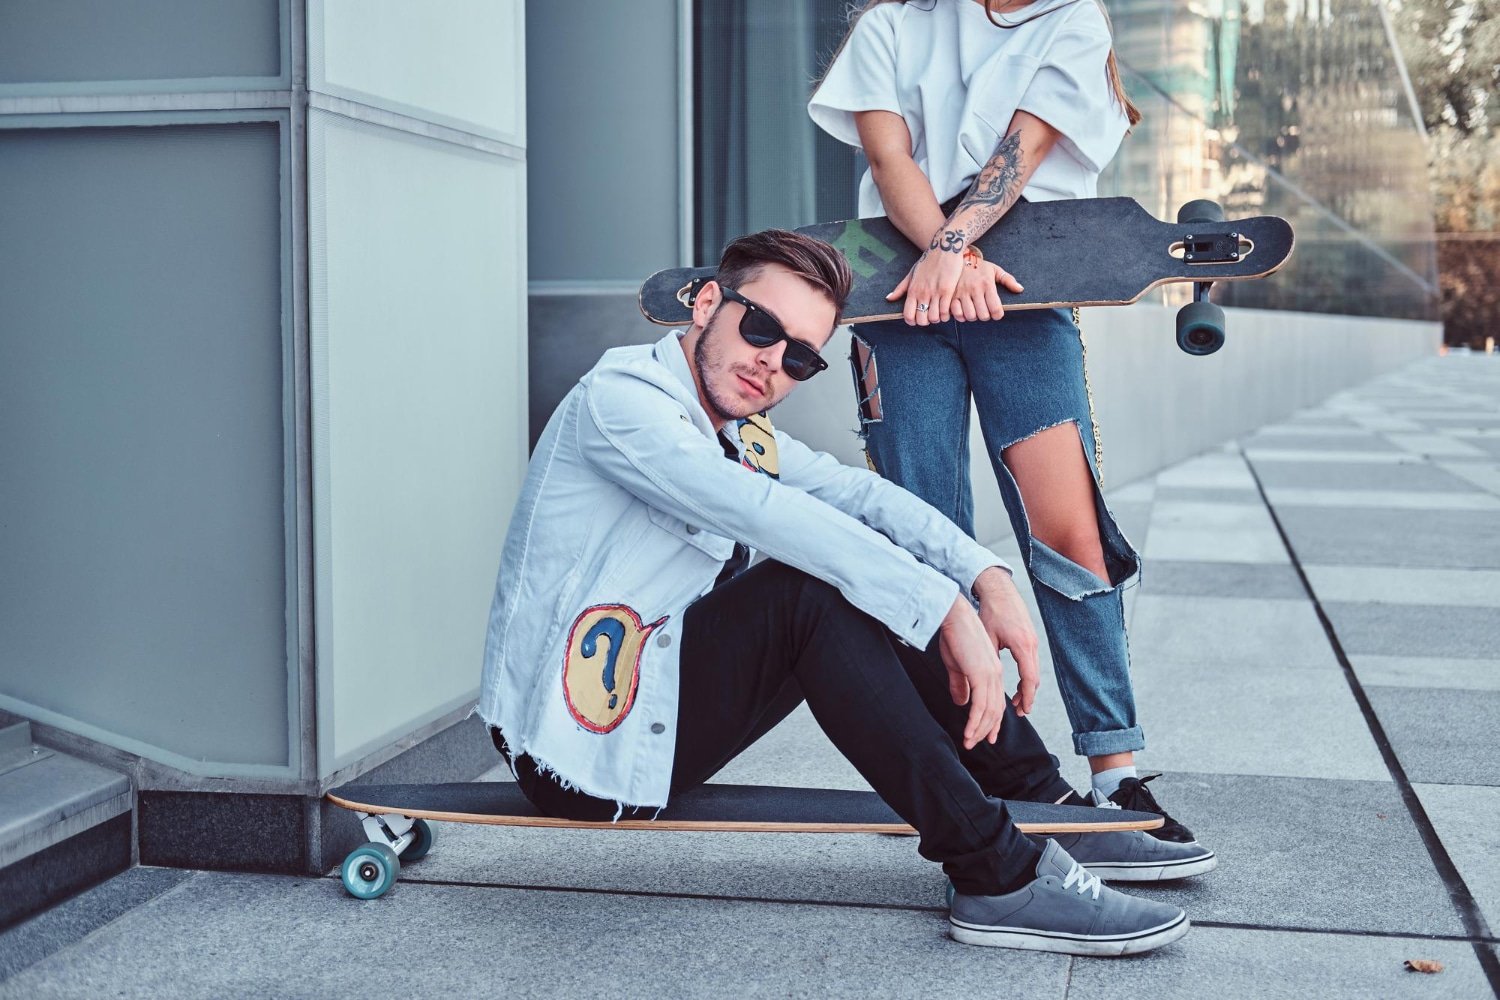 Upgrade Your Wardrobe With General Pants’s Trendy Streetwear